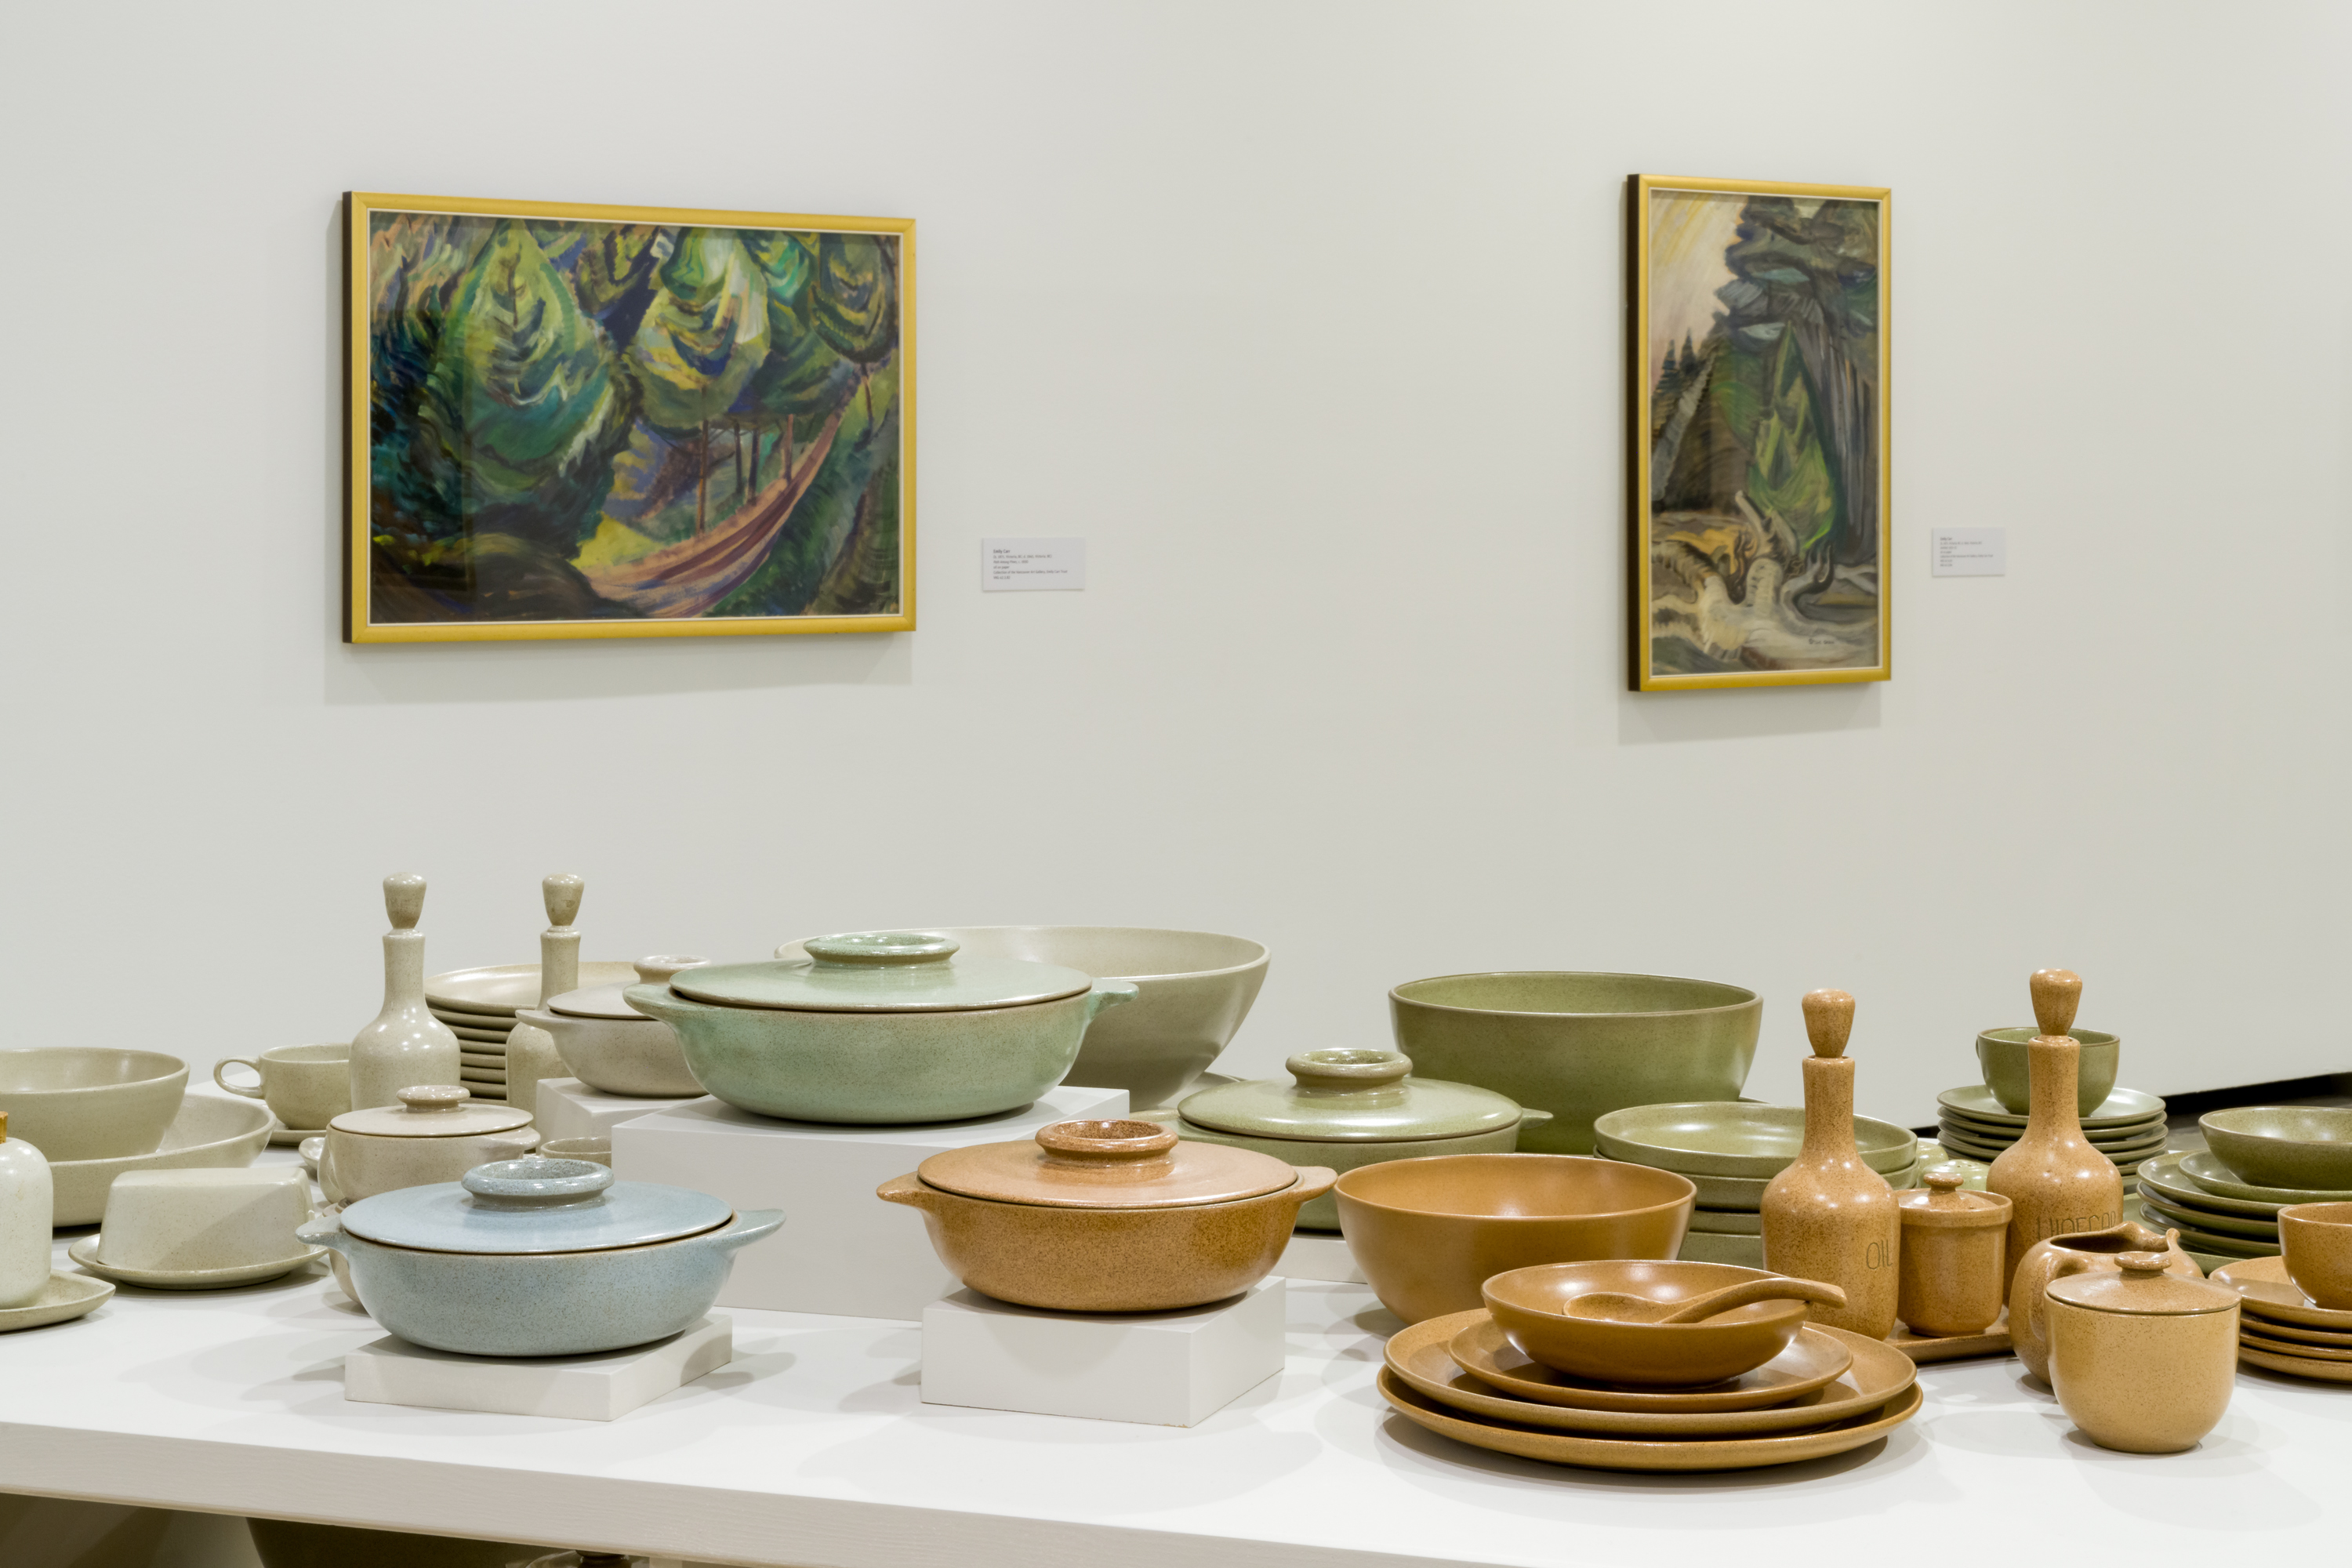 Dinnerware in light green, light blue, light orange and beige, with two paintings in the background.